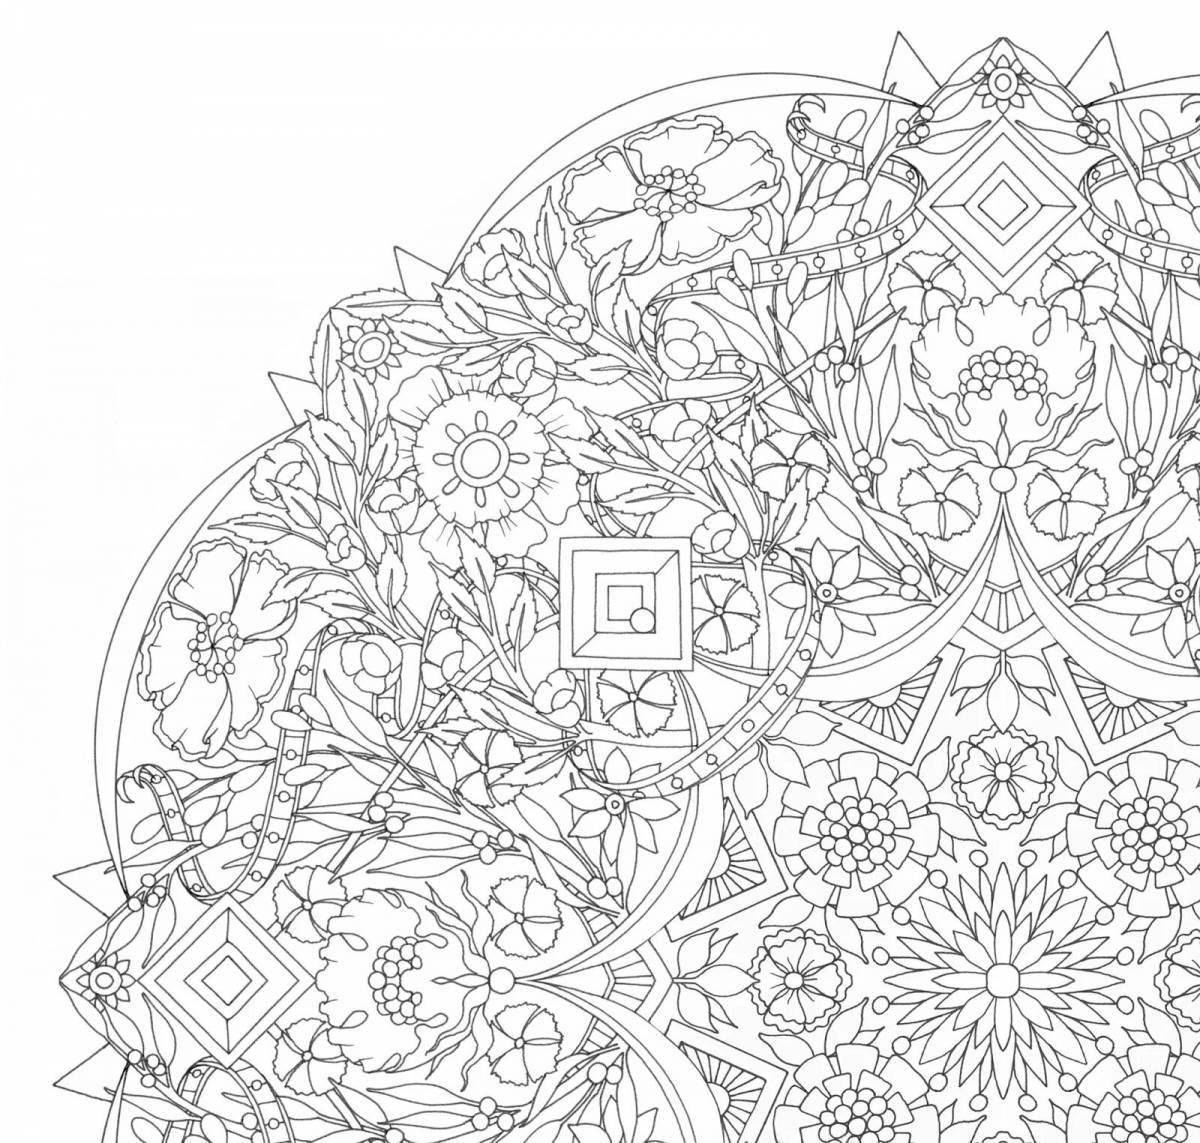 Charming coloring book with details